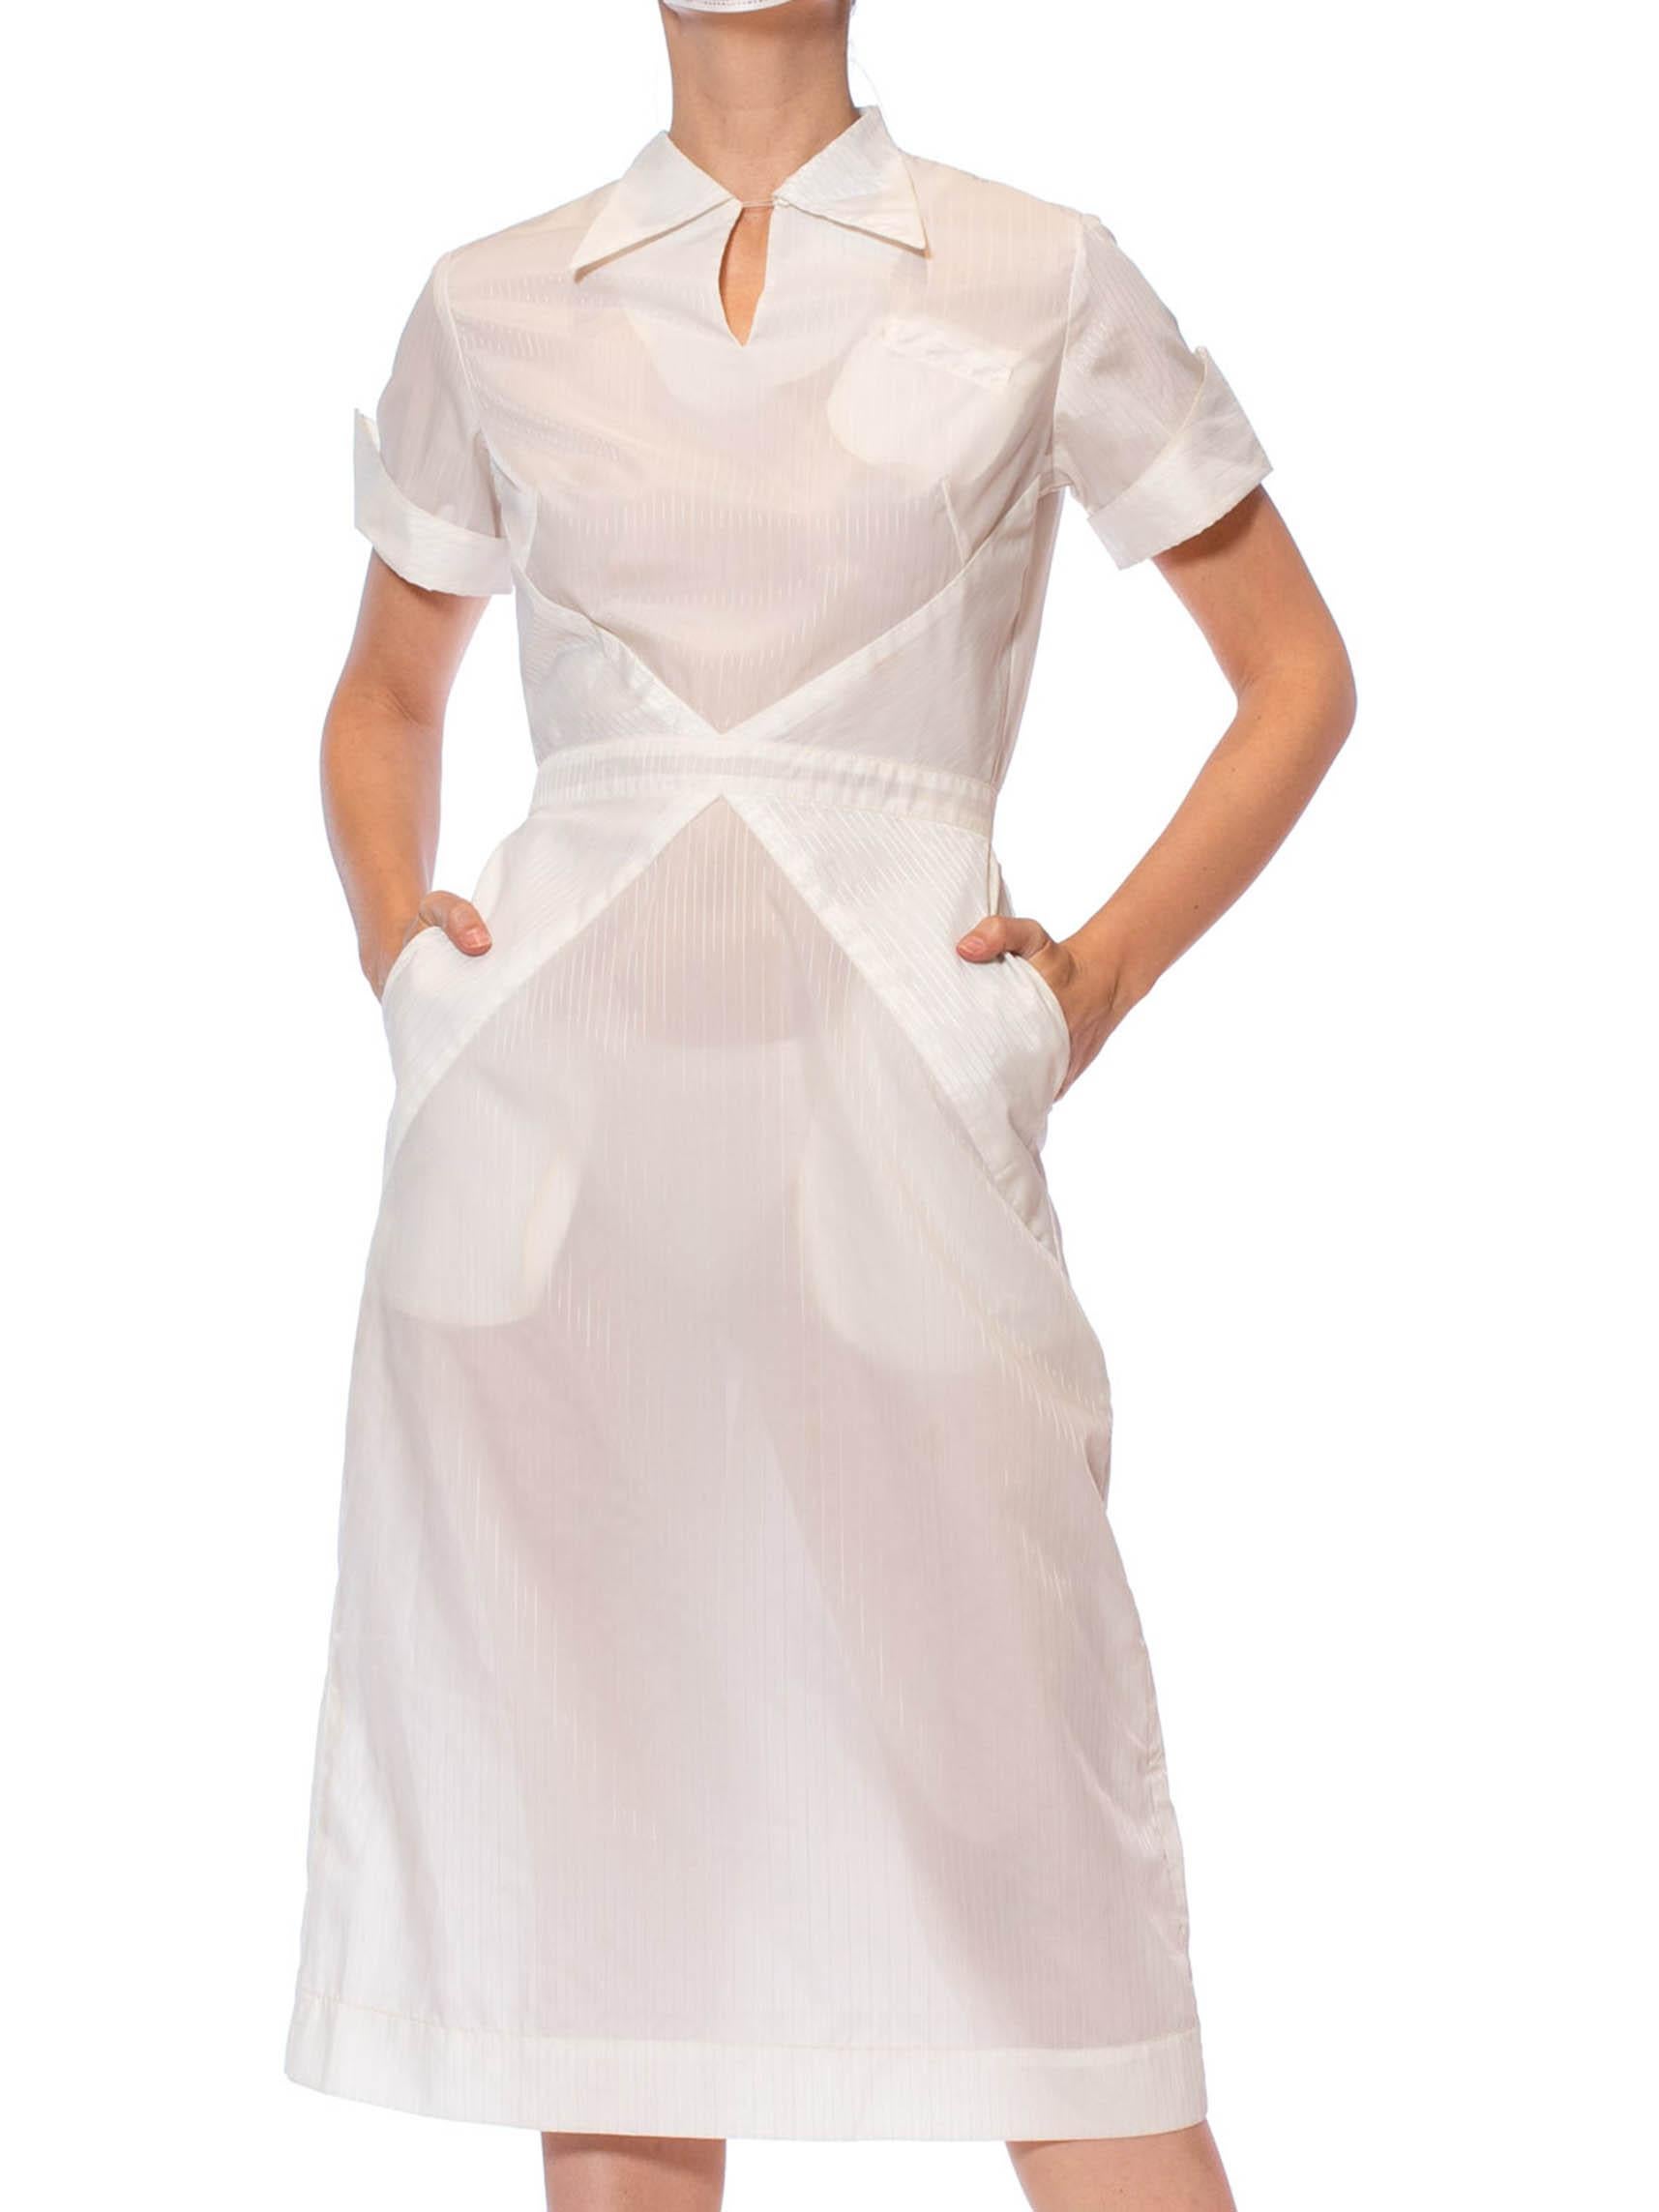 1950S White Nylon Pin-Up Nurse Uniform Dress
Decade: 1950s.

Material: Nylon .

Vintage condition: Good.

Measurements
Bust: 37 in.

Waist: 26 in.

Hips: 38 in.

Overall length: 45 in.

US: S.